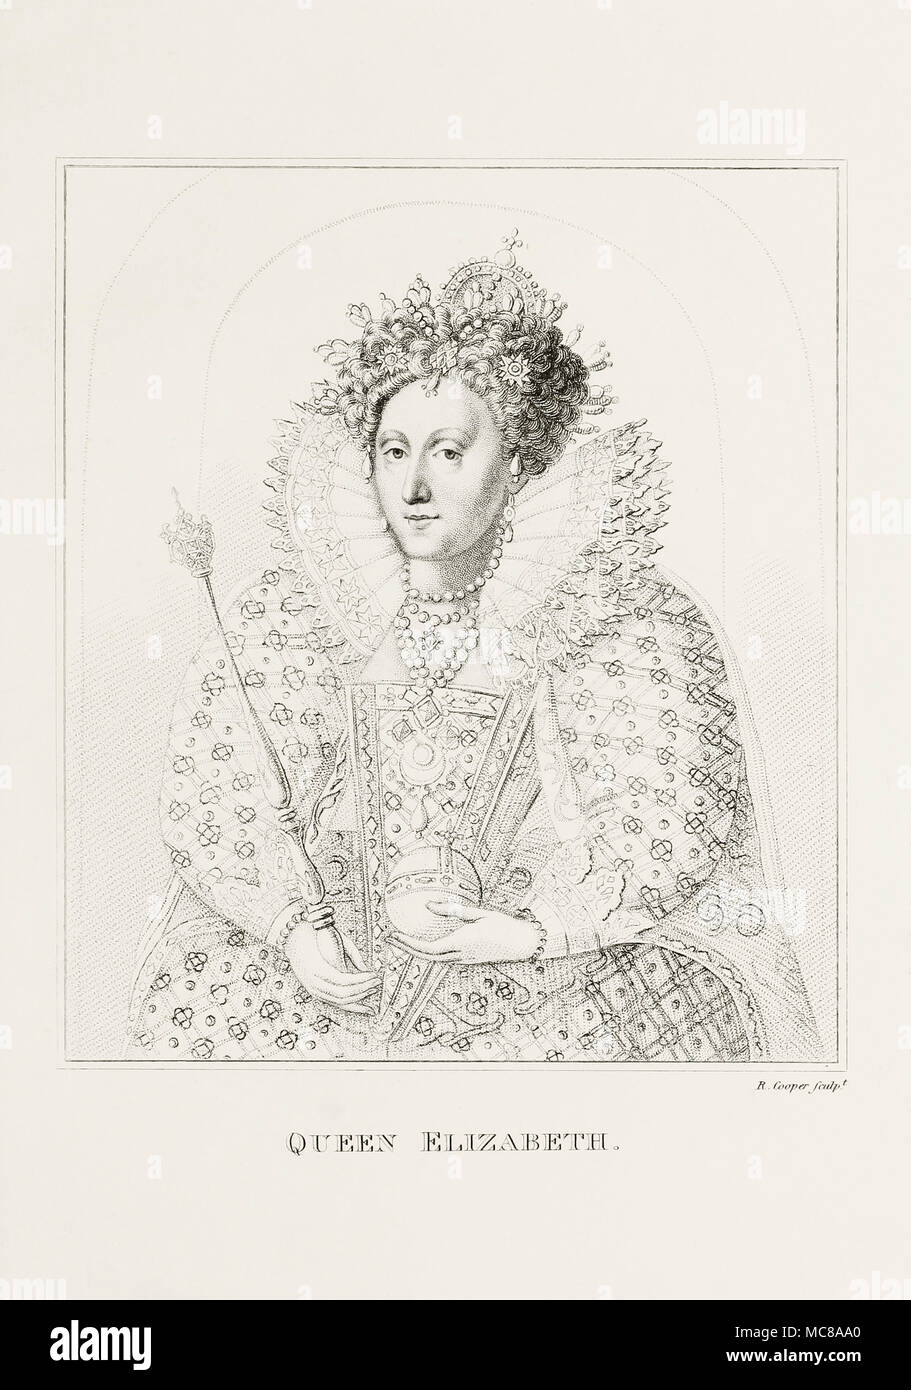 Queen Elizabeth I of England and Ireland, 1533-1603.  From Woodburn’s Gallery of Rare Portraits, published 1816. Stock Photo